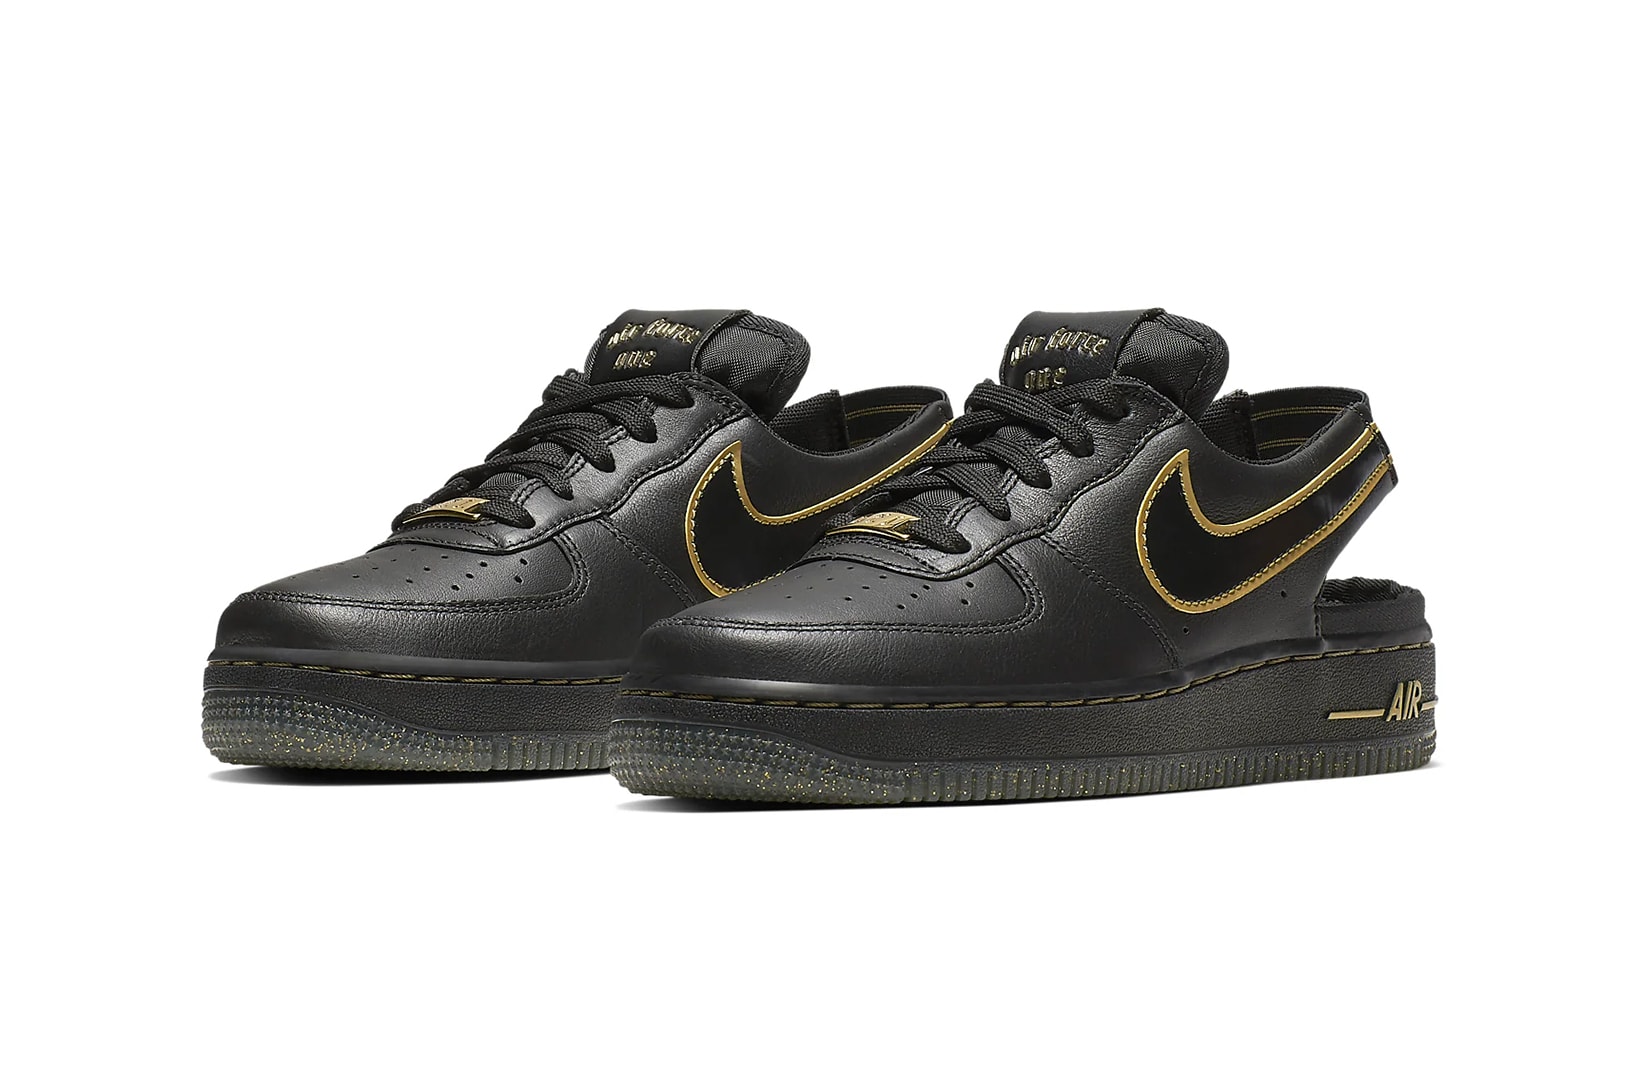 nike air force 1 vtf big kids sneakers black gold leather glitter back to school 